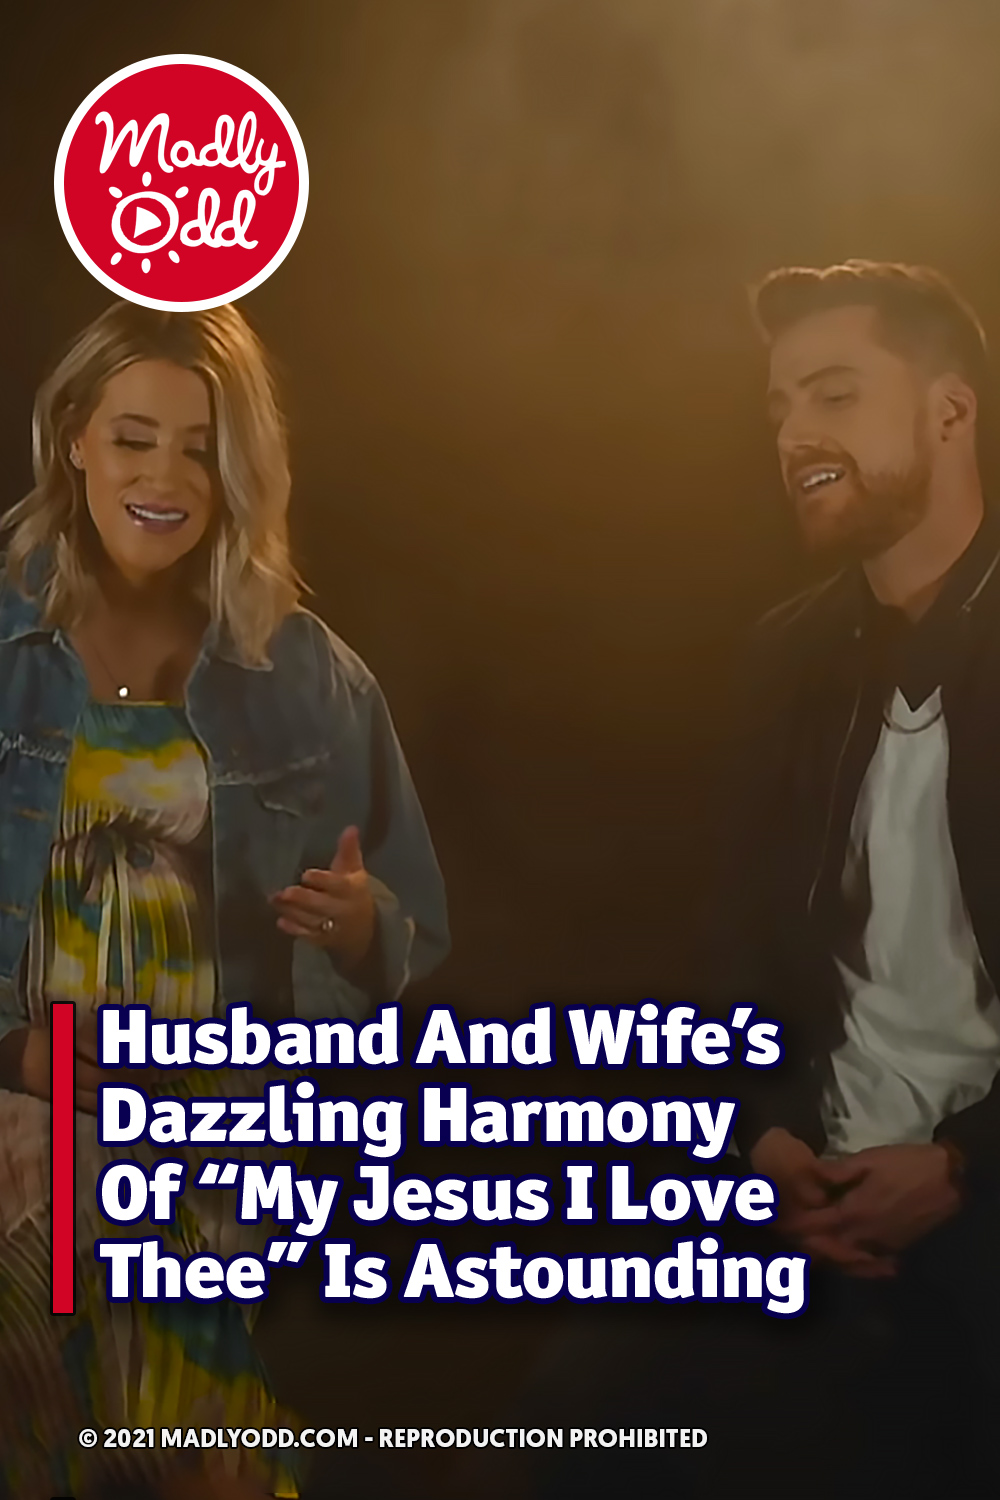 Husband And Wife’s Dazzling Harmony Of “My Jesus I Love Thee” Is Astounding